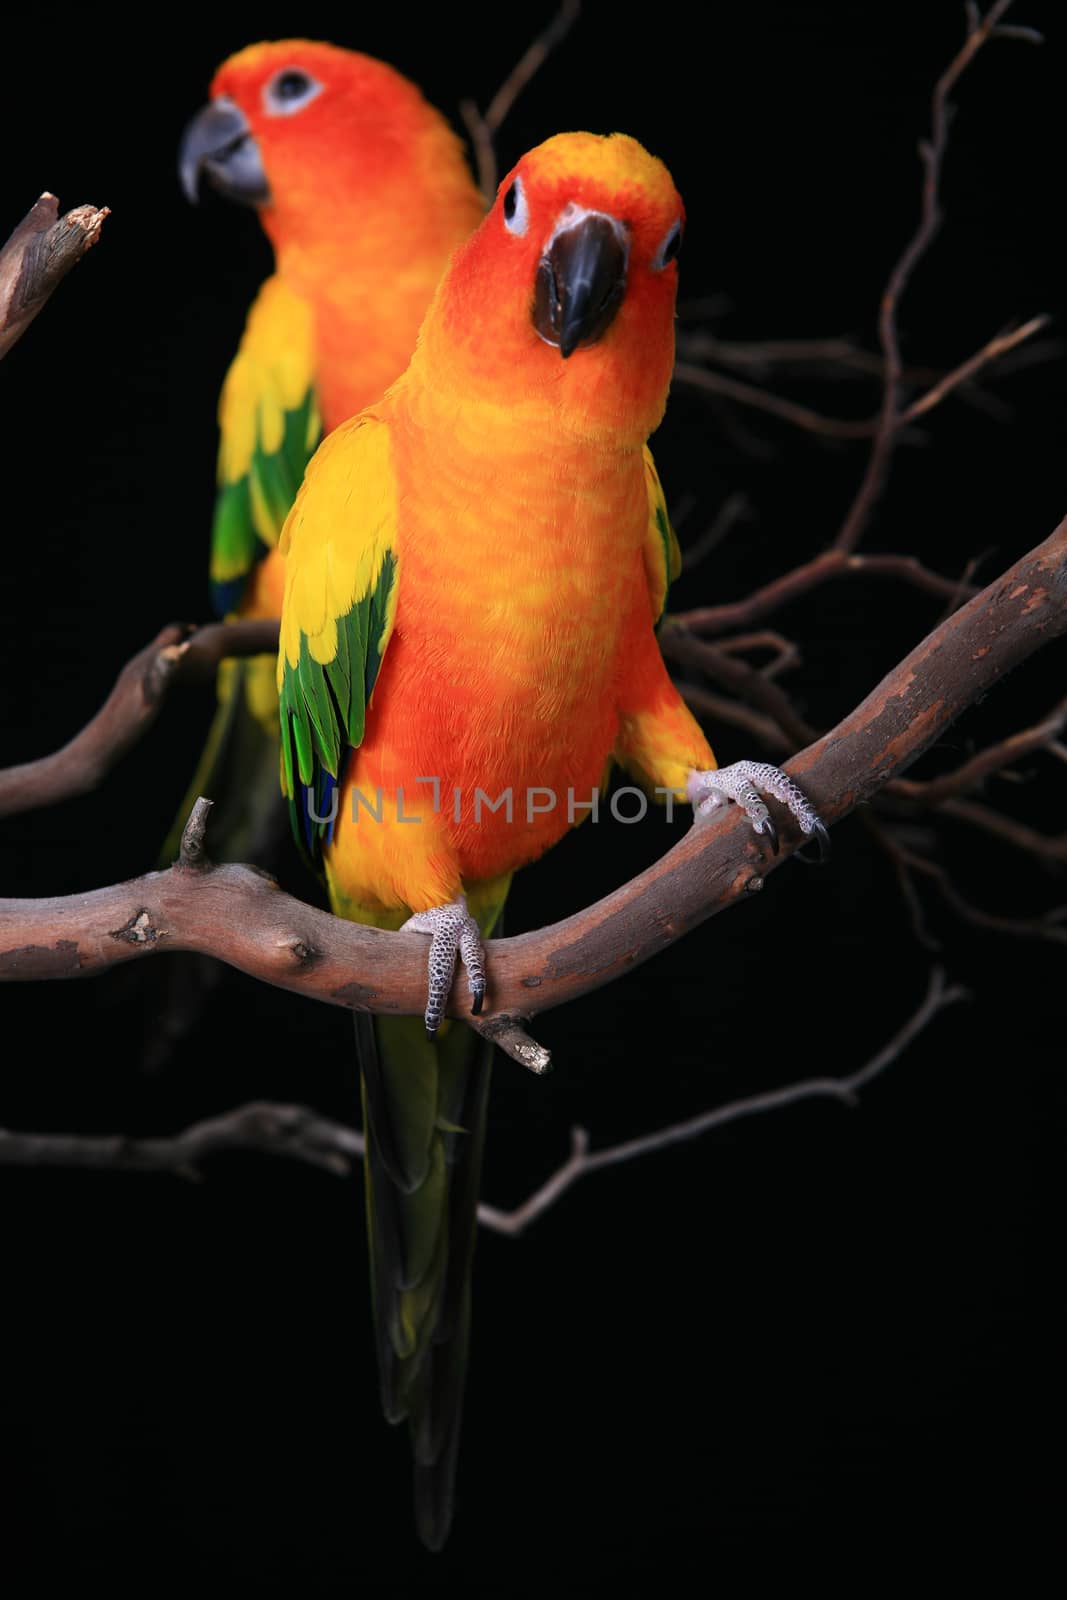 Two Perched Sun Conure Parrots With One Looking at The Viewer